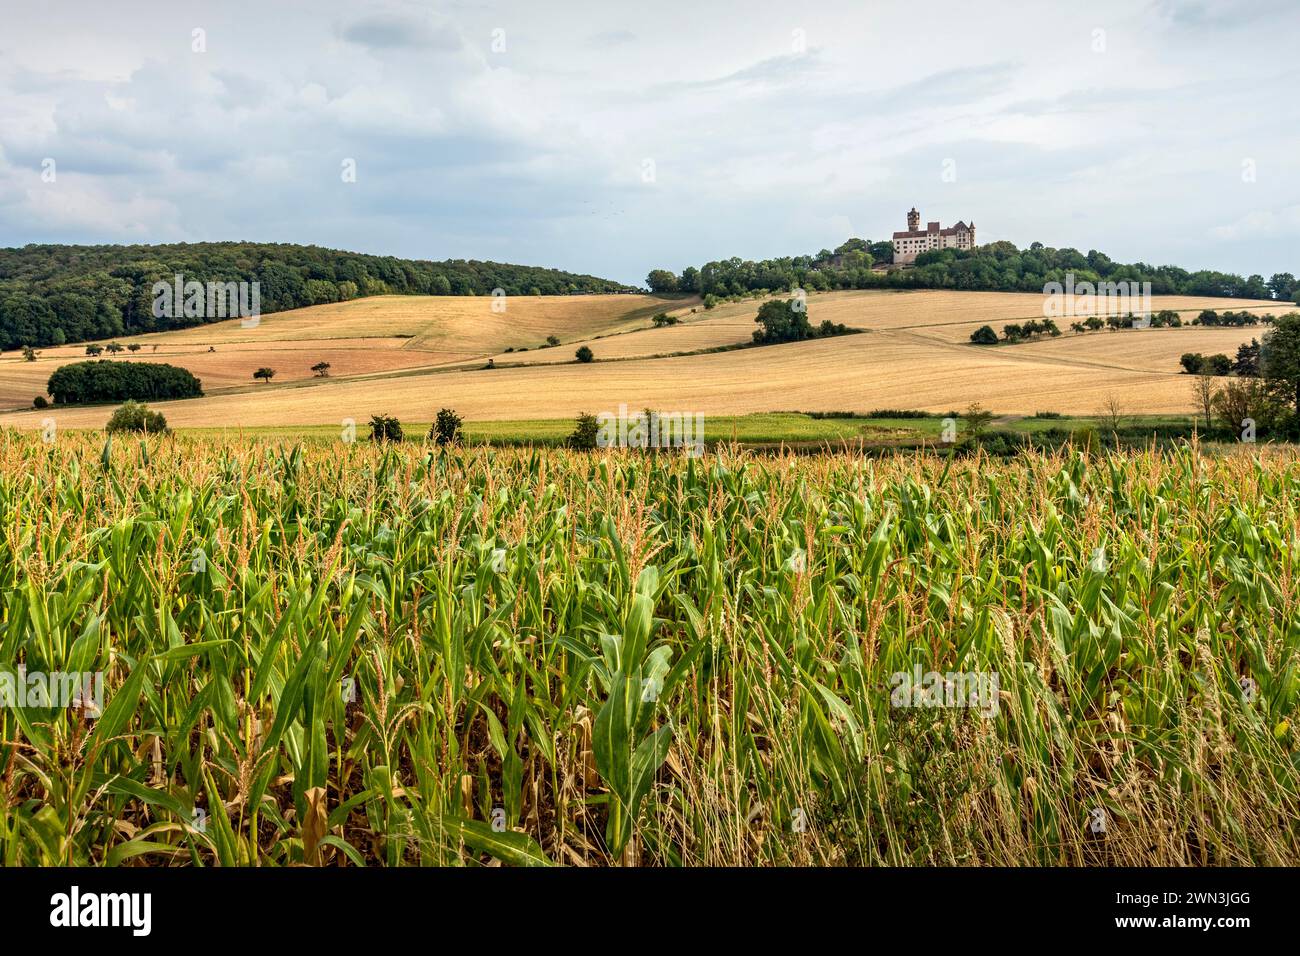 Ronneburg Castle, knight's castle from the Middle Ages, cornfield, harvested grain fields, field, hill, forest, dried-up cultural landscape Stock Photo